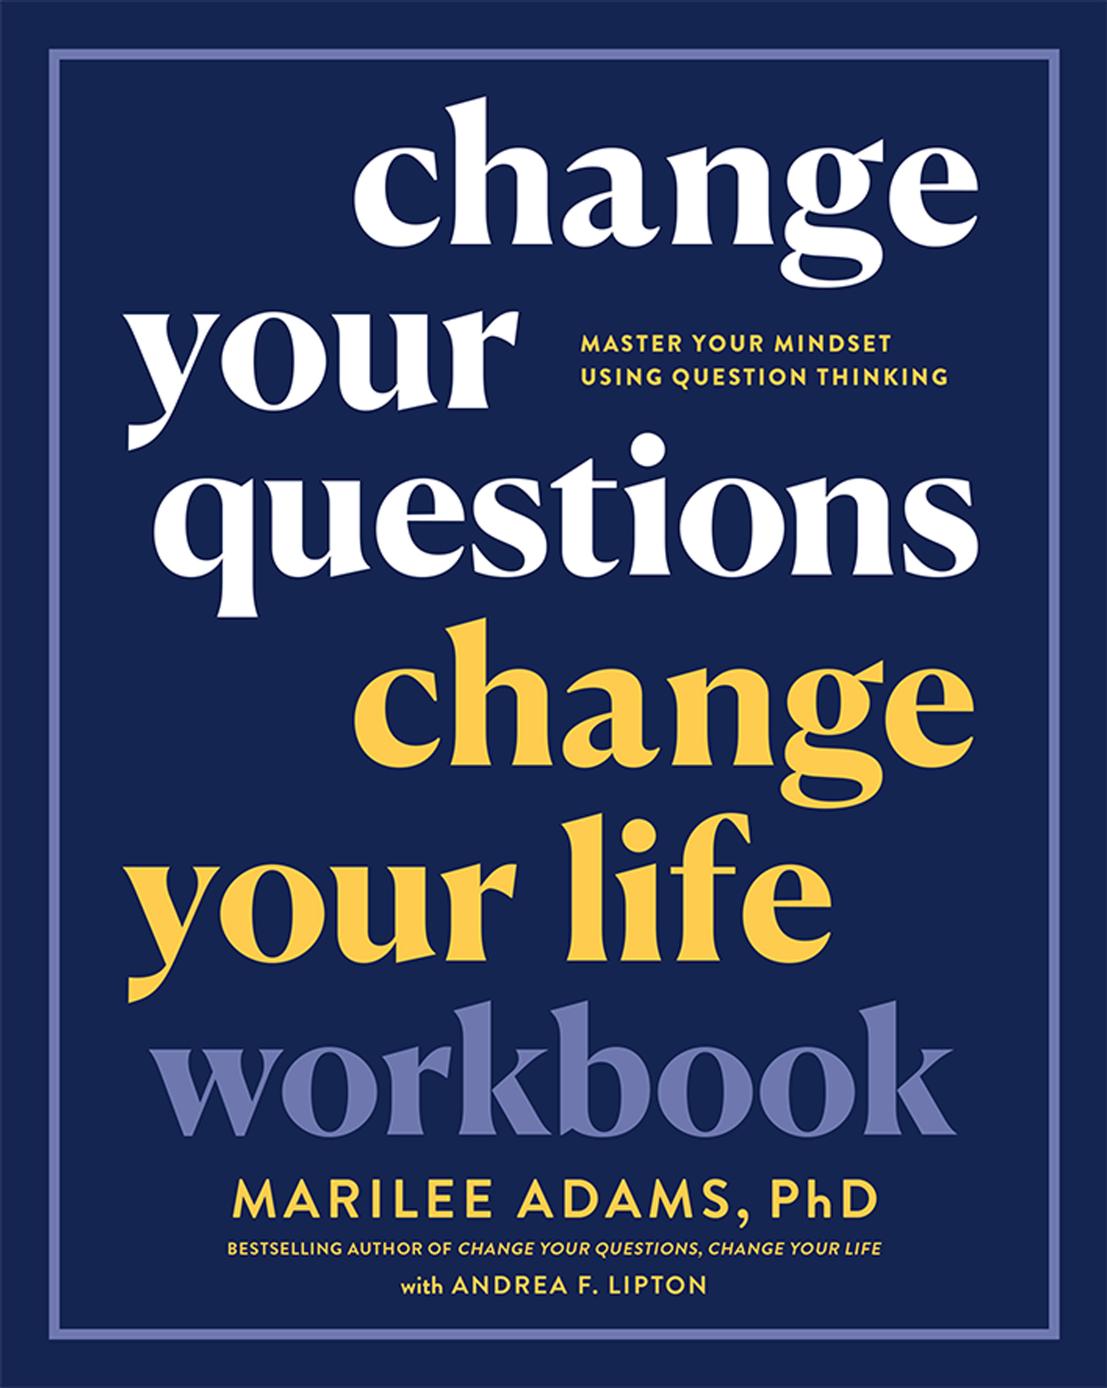 Change Your Questions, Change Your Life Workbook by Marilee Adams and Andrea F. Lipton